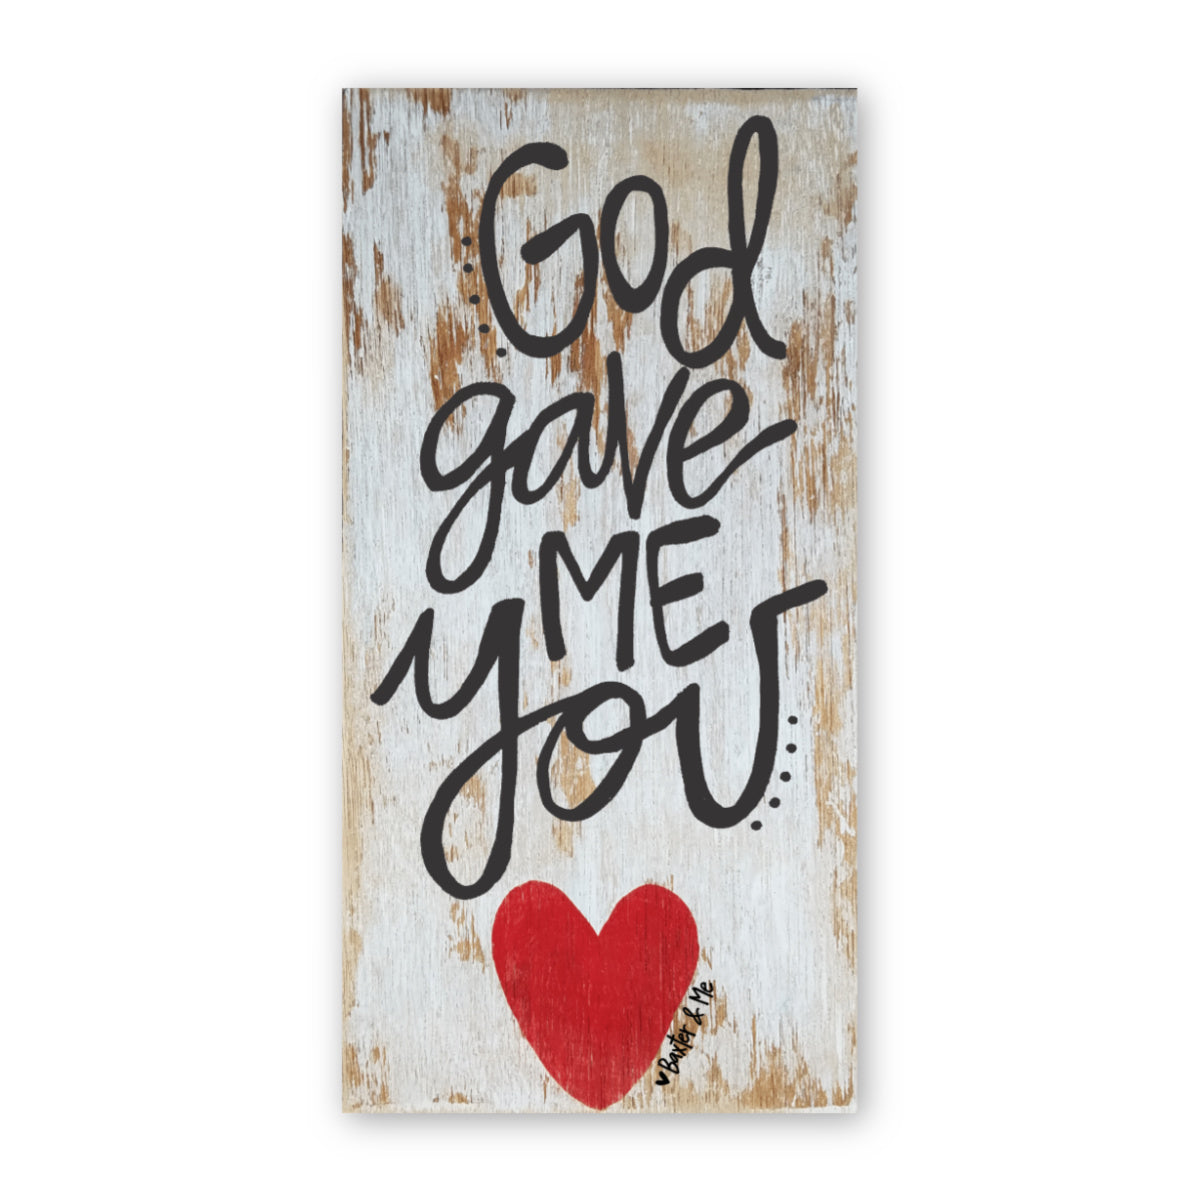 God Gave Me You 12" x 24" - Wrapped Canvas